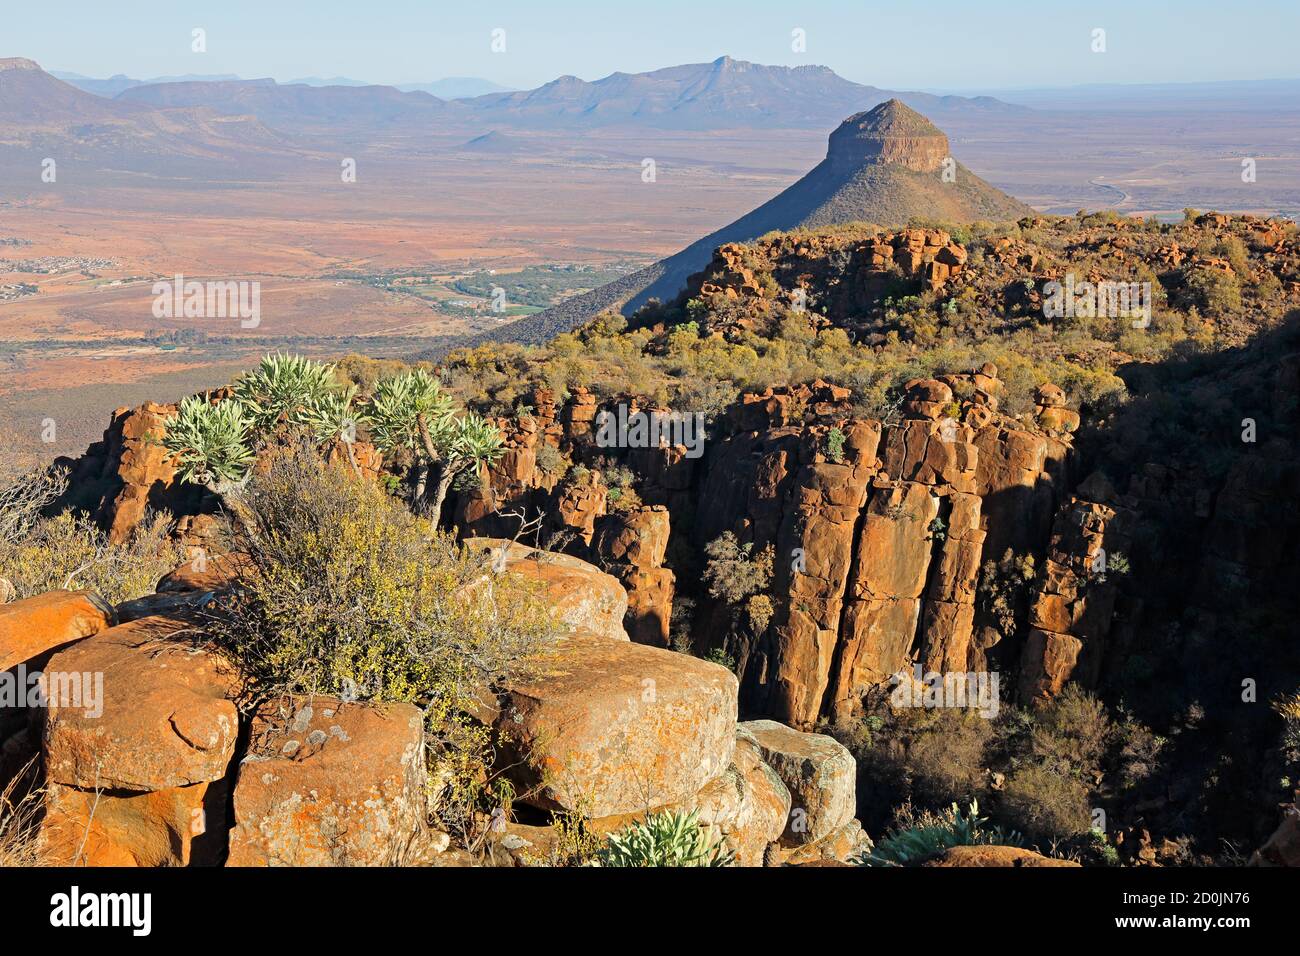 Landscape view of the scenic Valley of desolation, Camdeboo National Park, South Africa Stock Photo